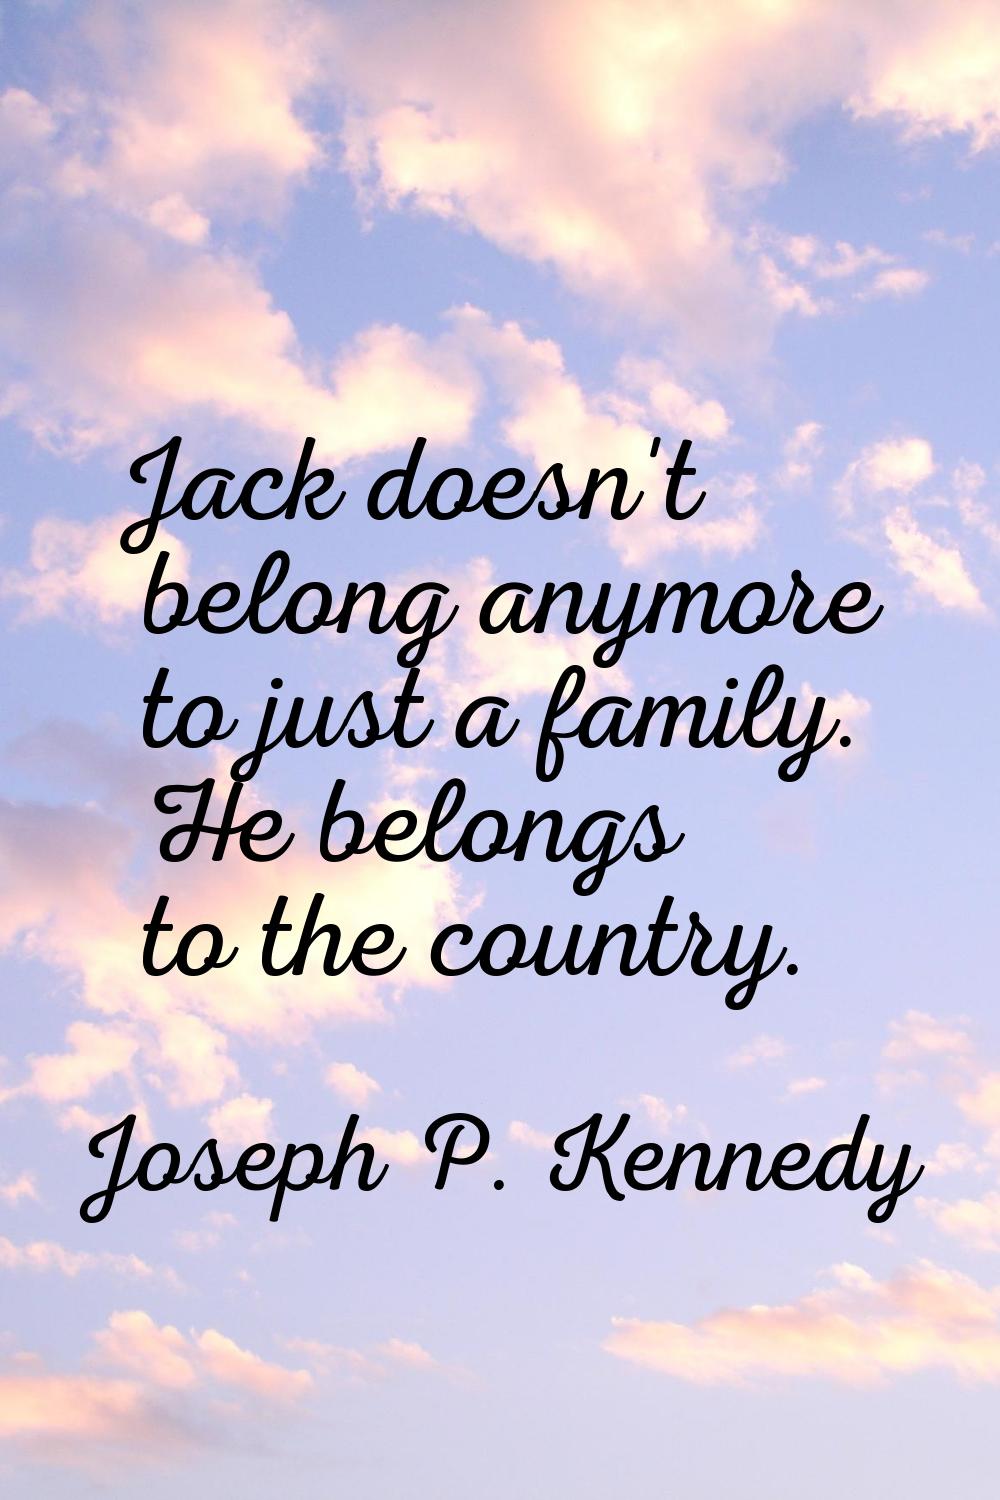 Jack doesn't belong anymore to just a family. He belongs to the country.